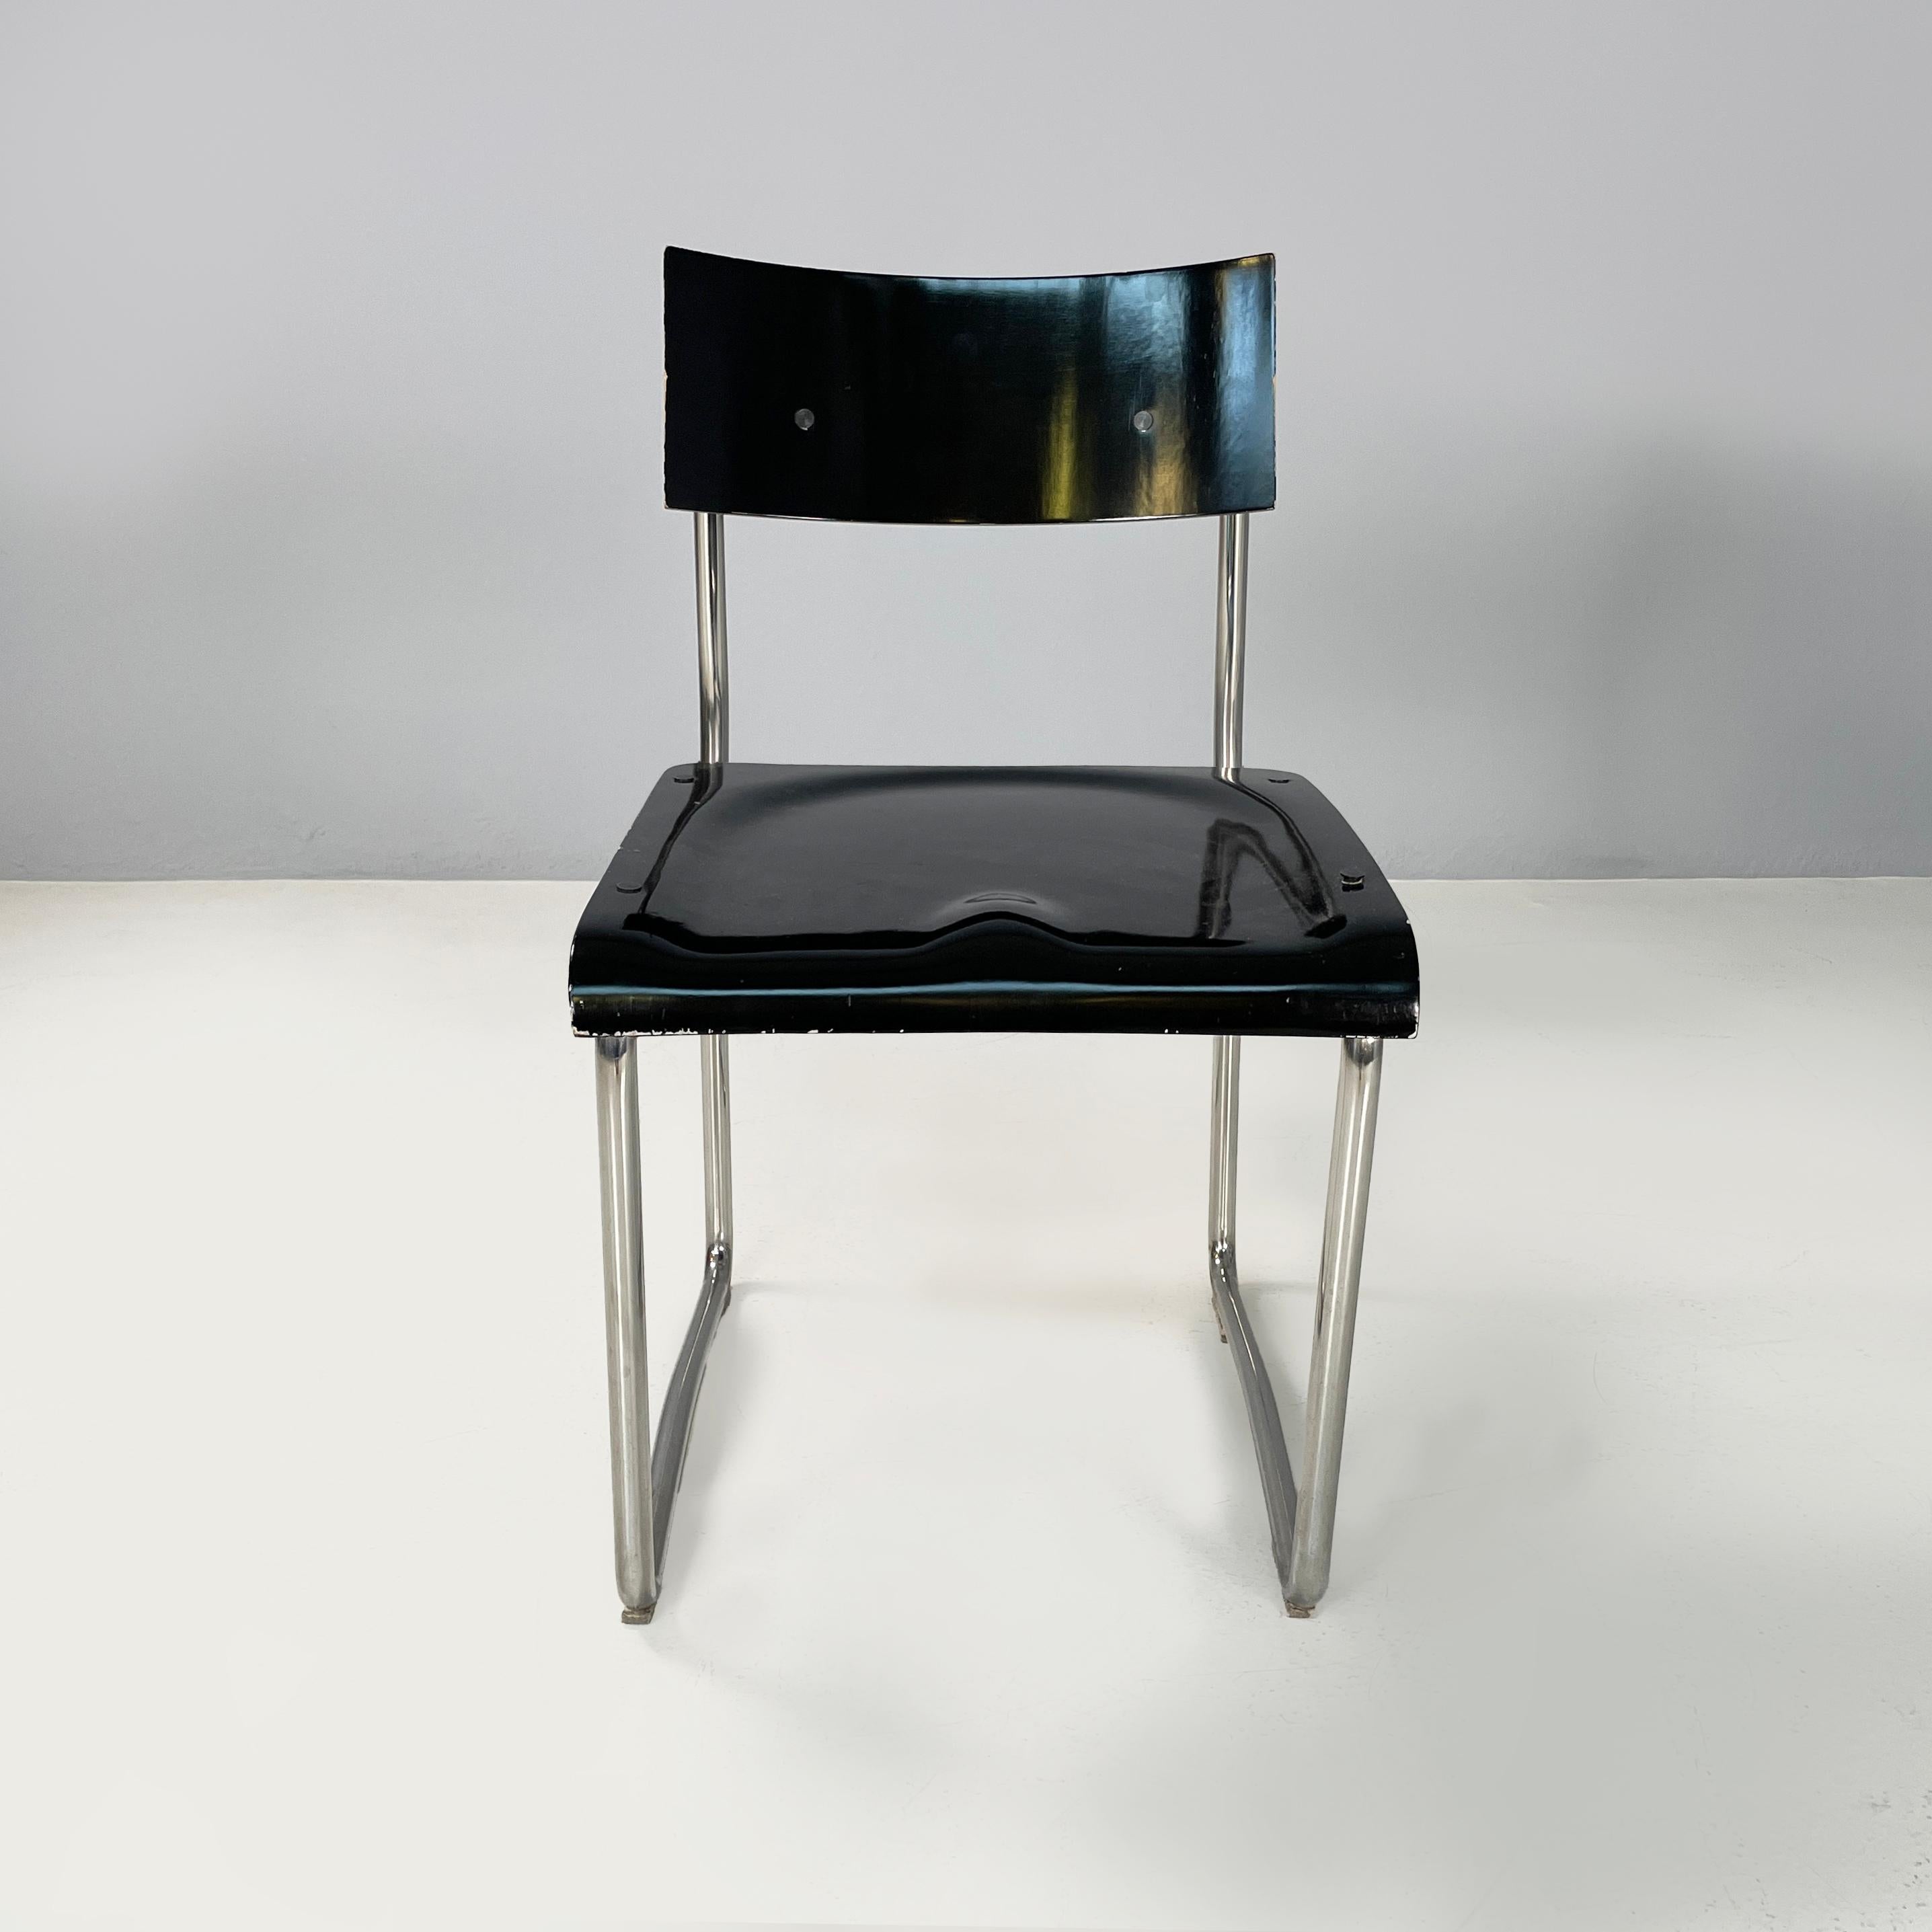 Modern Italian modern Black wood and metal Chairs Lariana by Terragni for Zanotta, 1980 For Sale